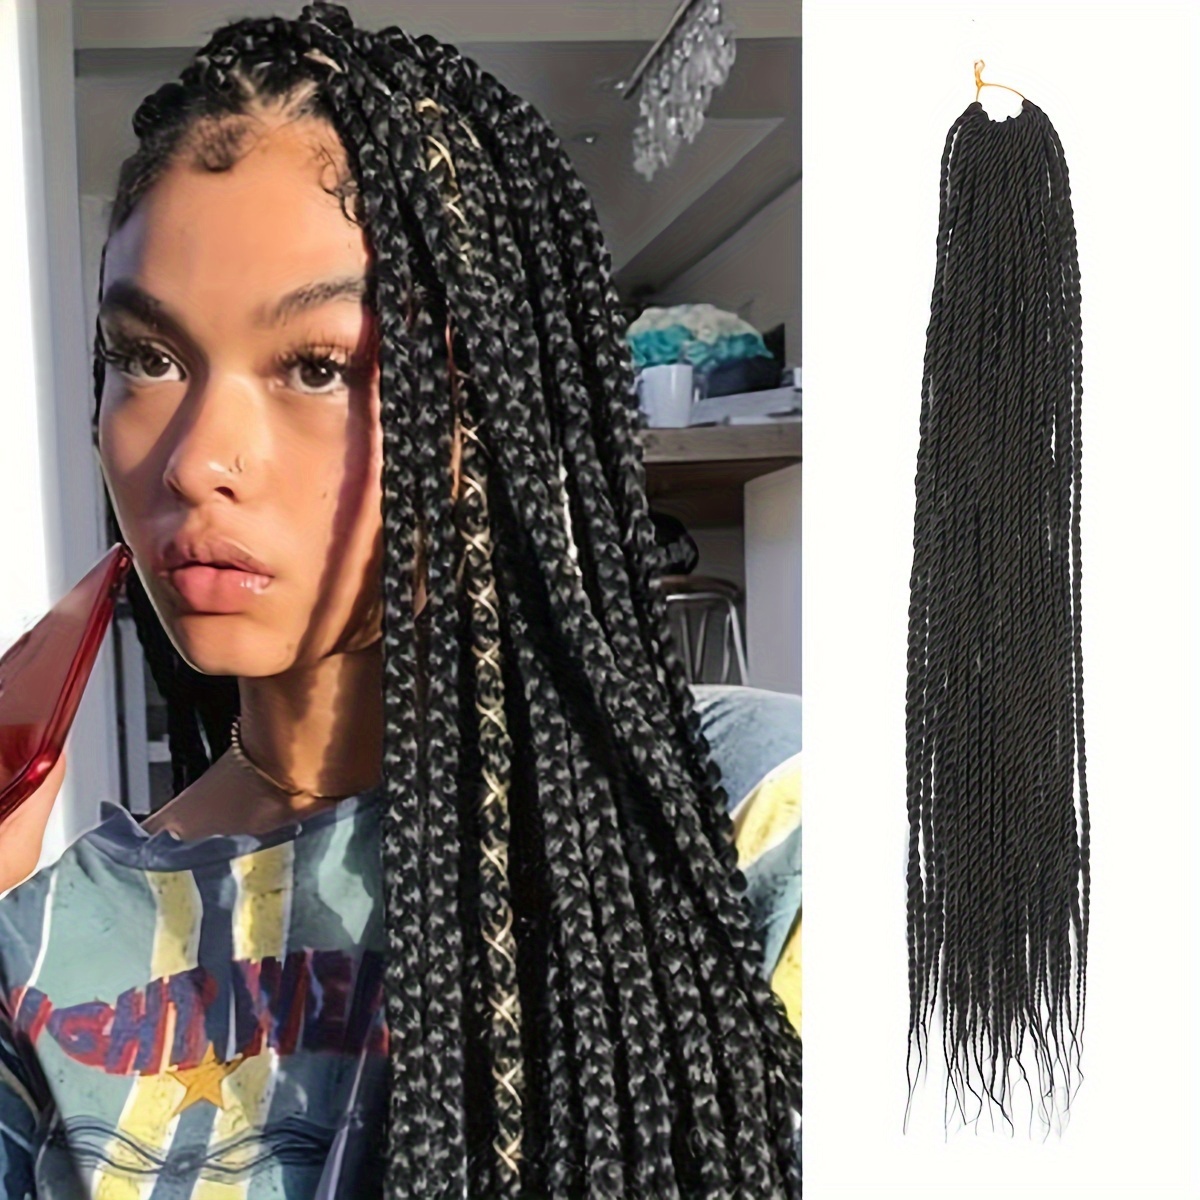 Black Braiding Hair 26 inch Pre Stretched Easy for Braiding Hair Yaki Texture Professional Braiding Hair Hot Water Setting Synthetic Hair Extension